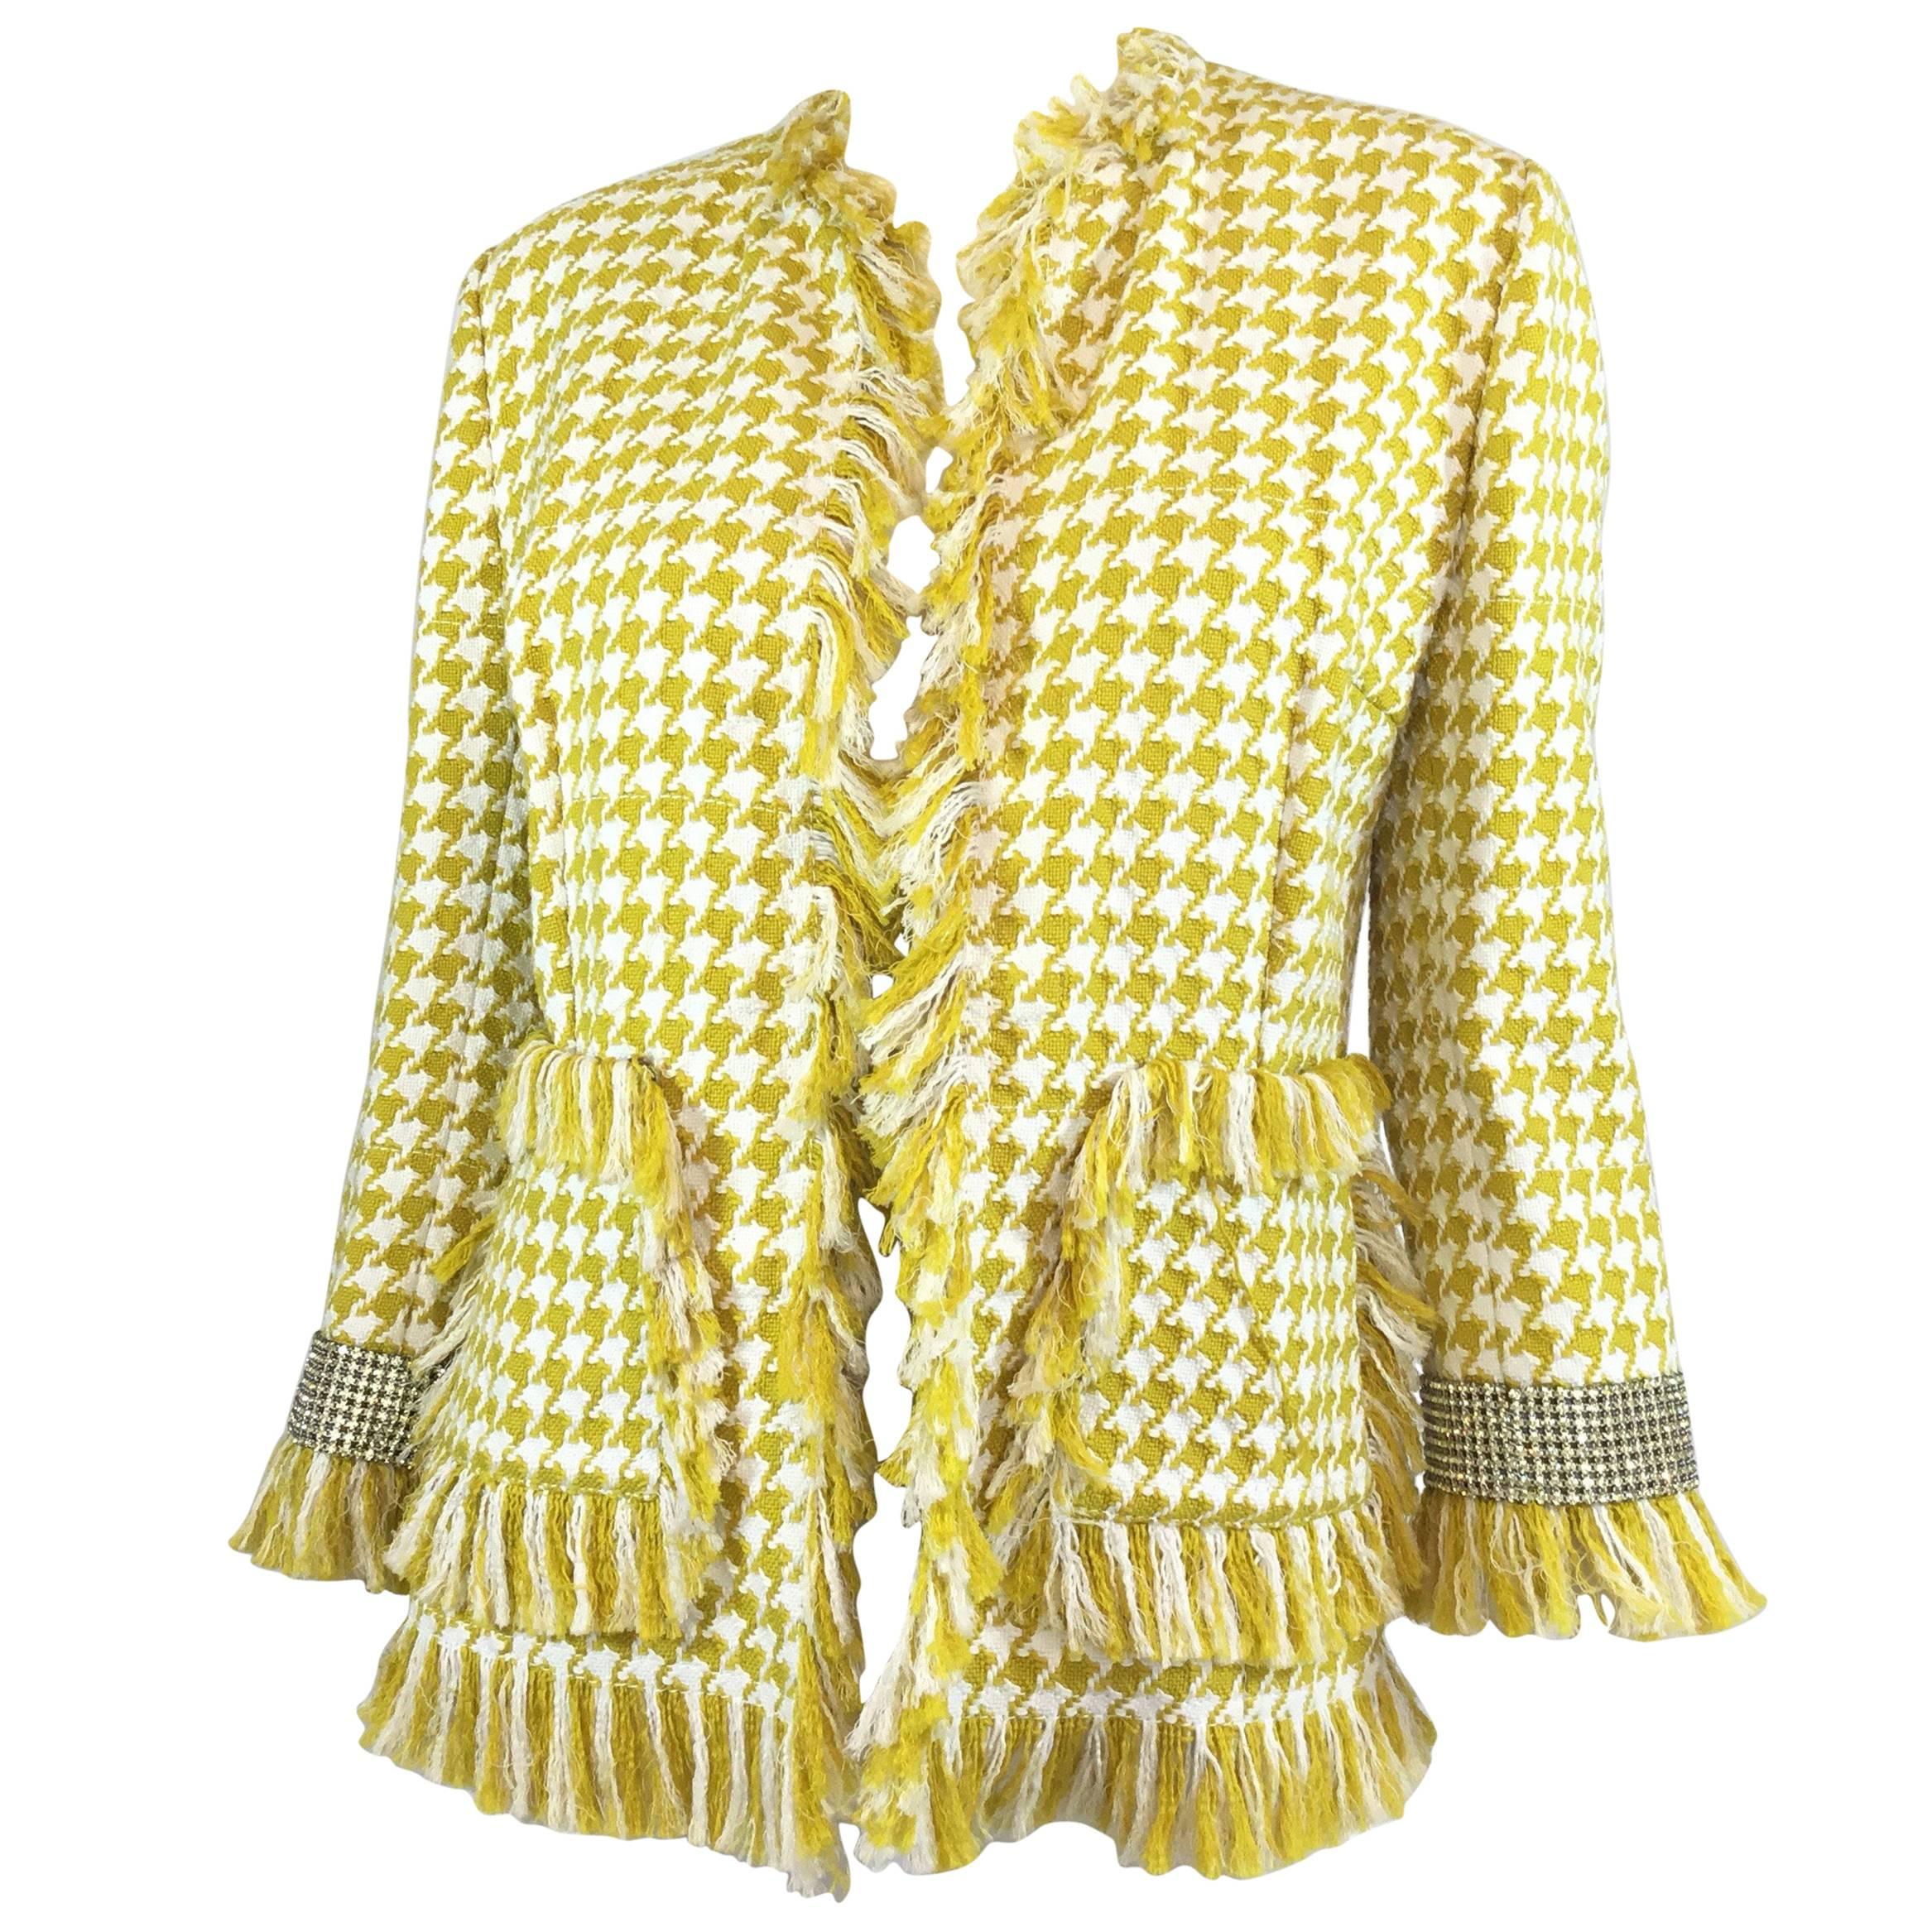 Dolce & Gabbana Houndstooth Jacket with Crystal Cuffs and Leopard Lining